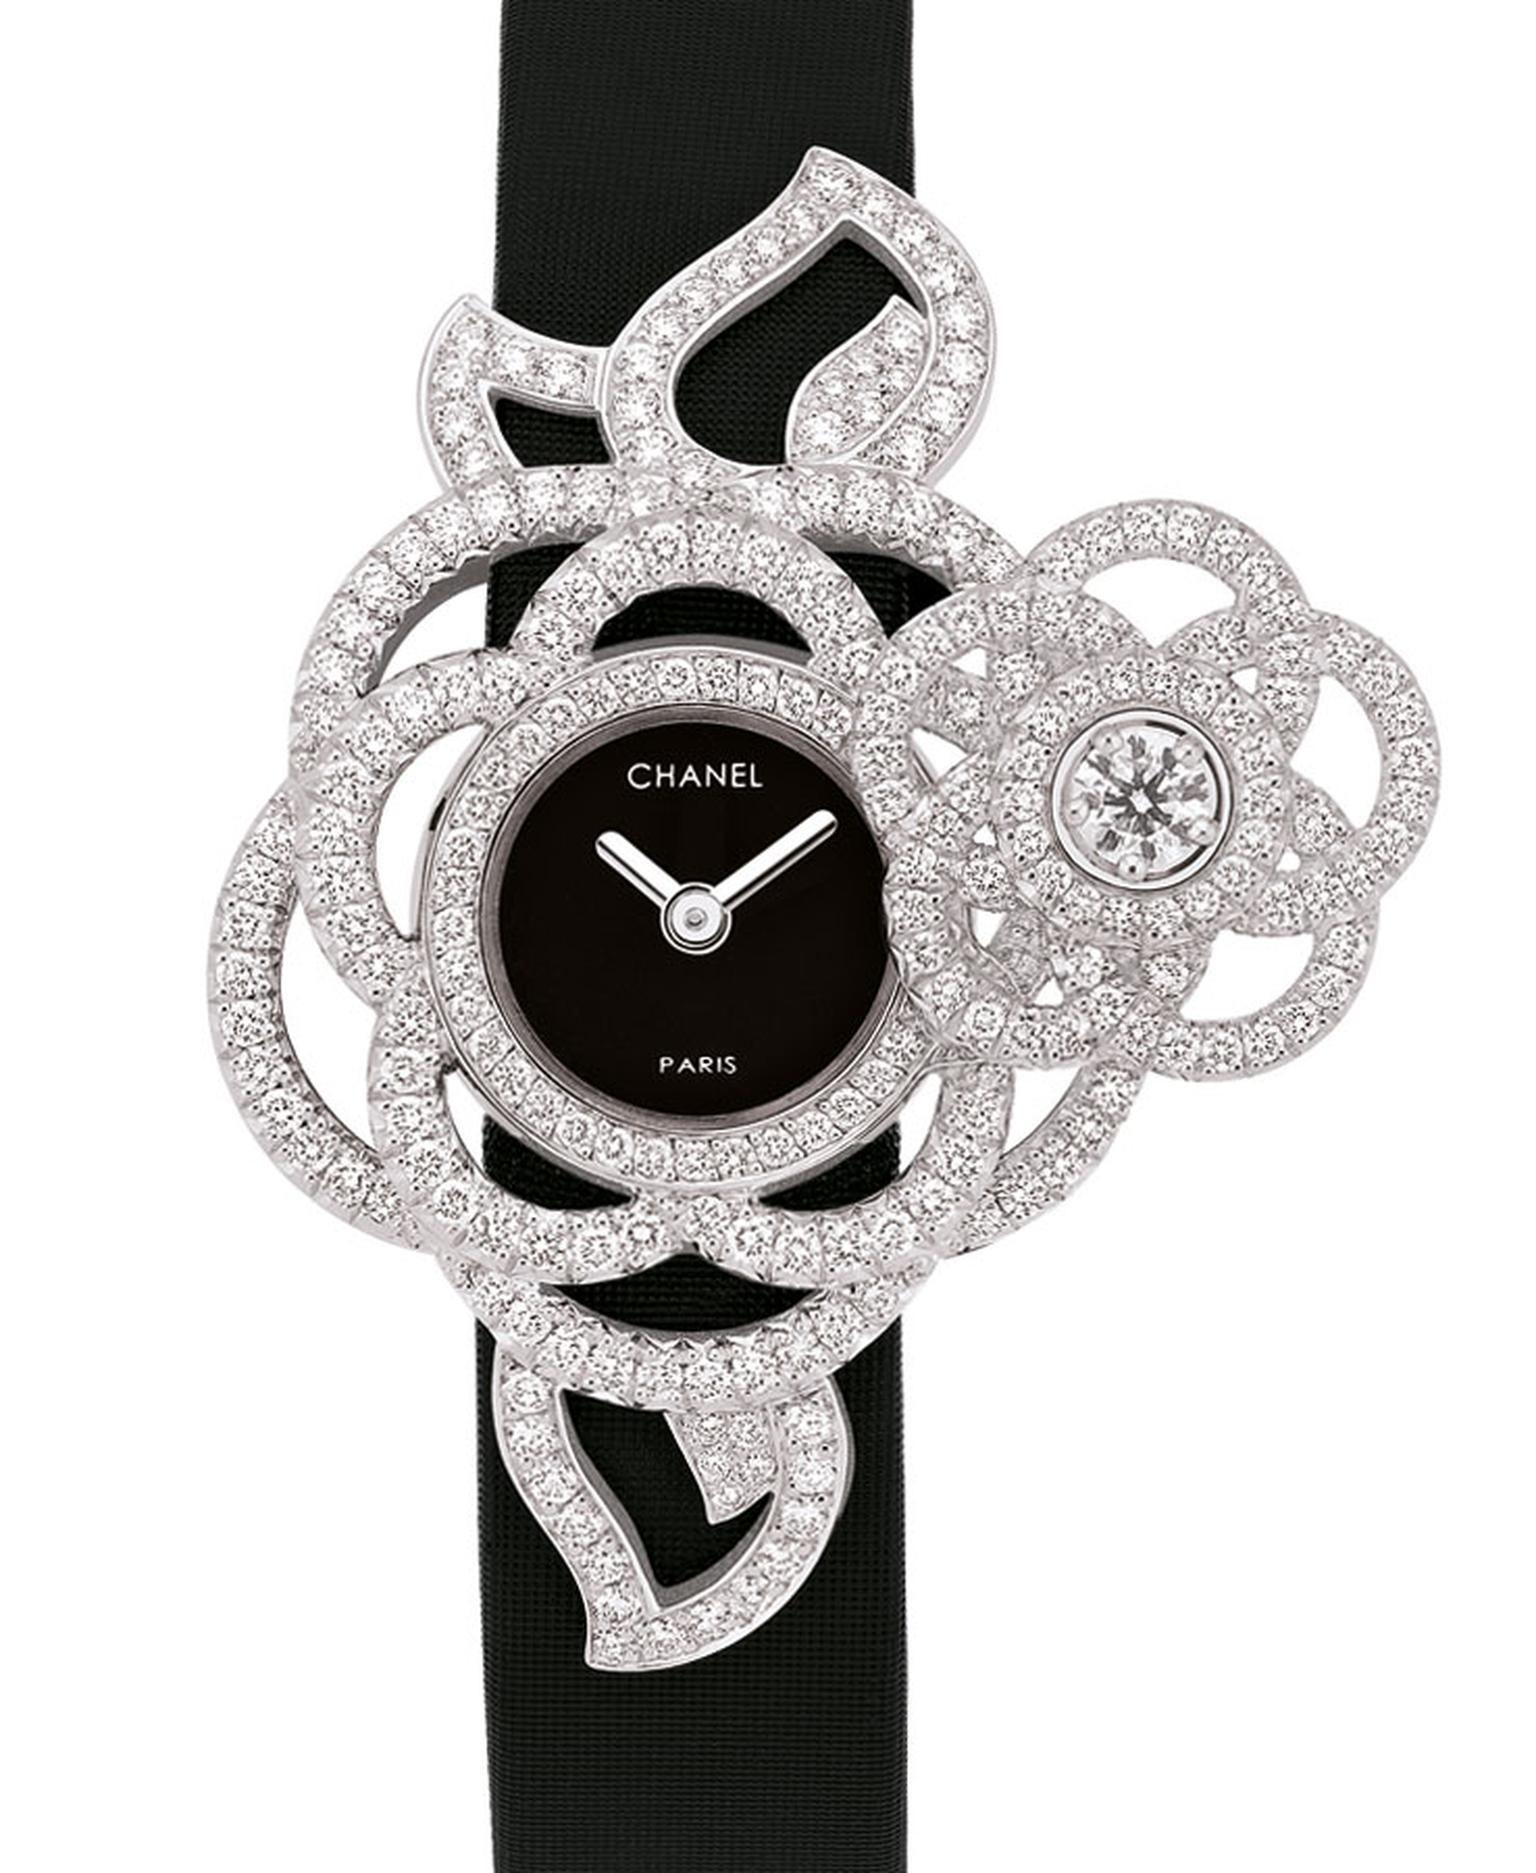 Chanel Came´lia Brode´ secret wtch in white gold and diamonds with black satin strap. Open